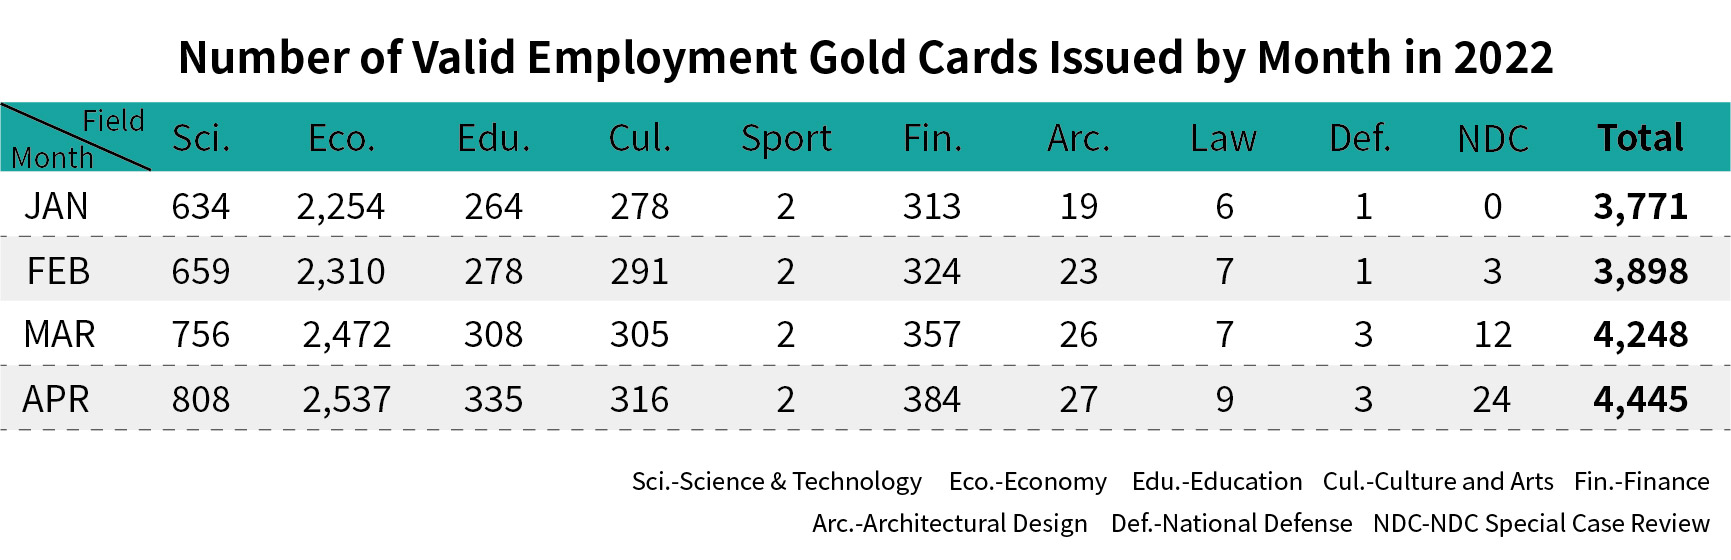 Number of Valid Employment Gold Cards Issued by Month-April